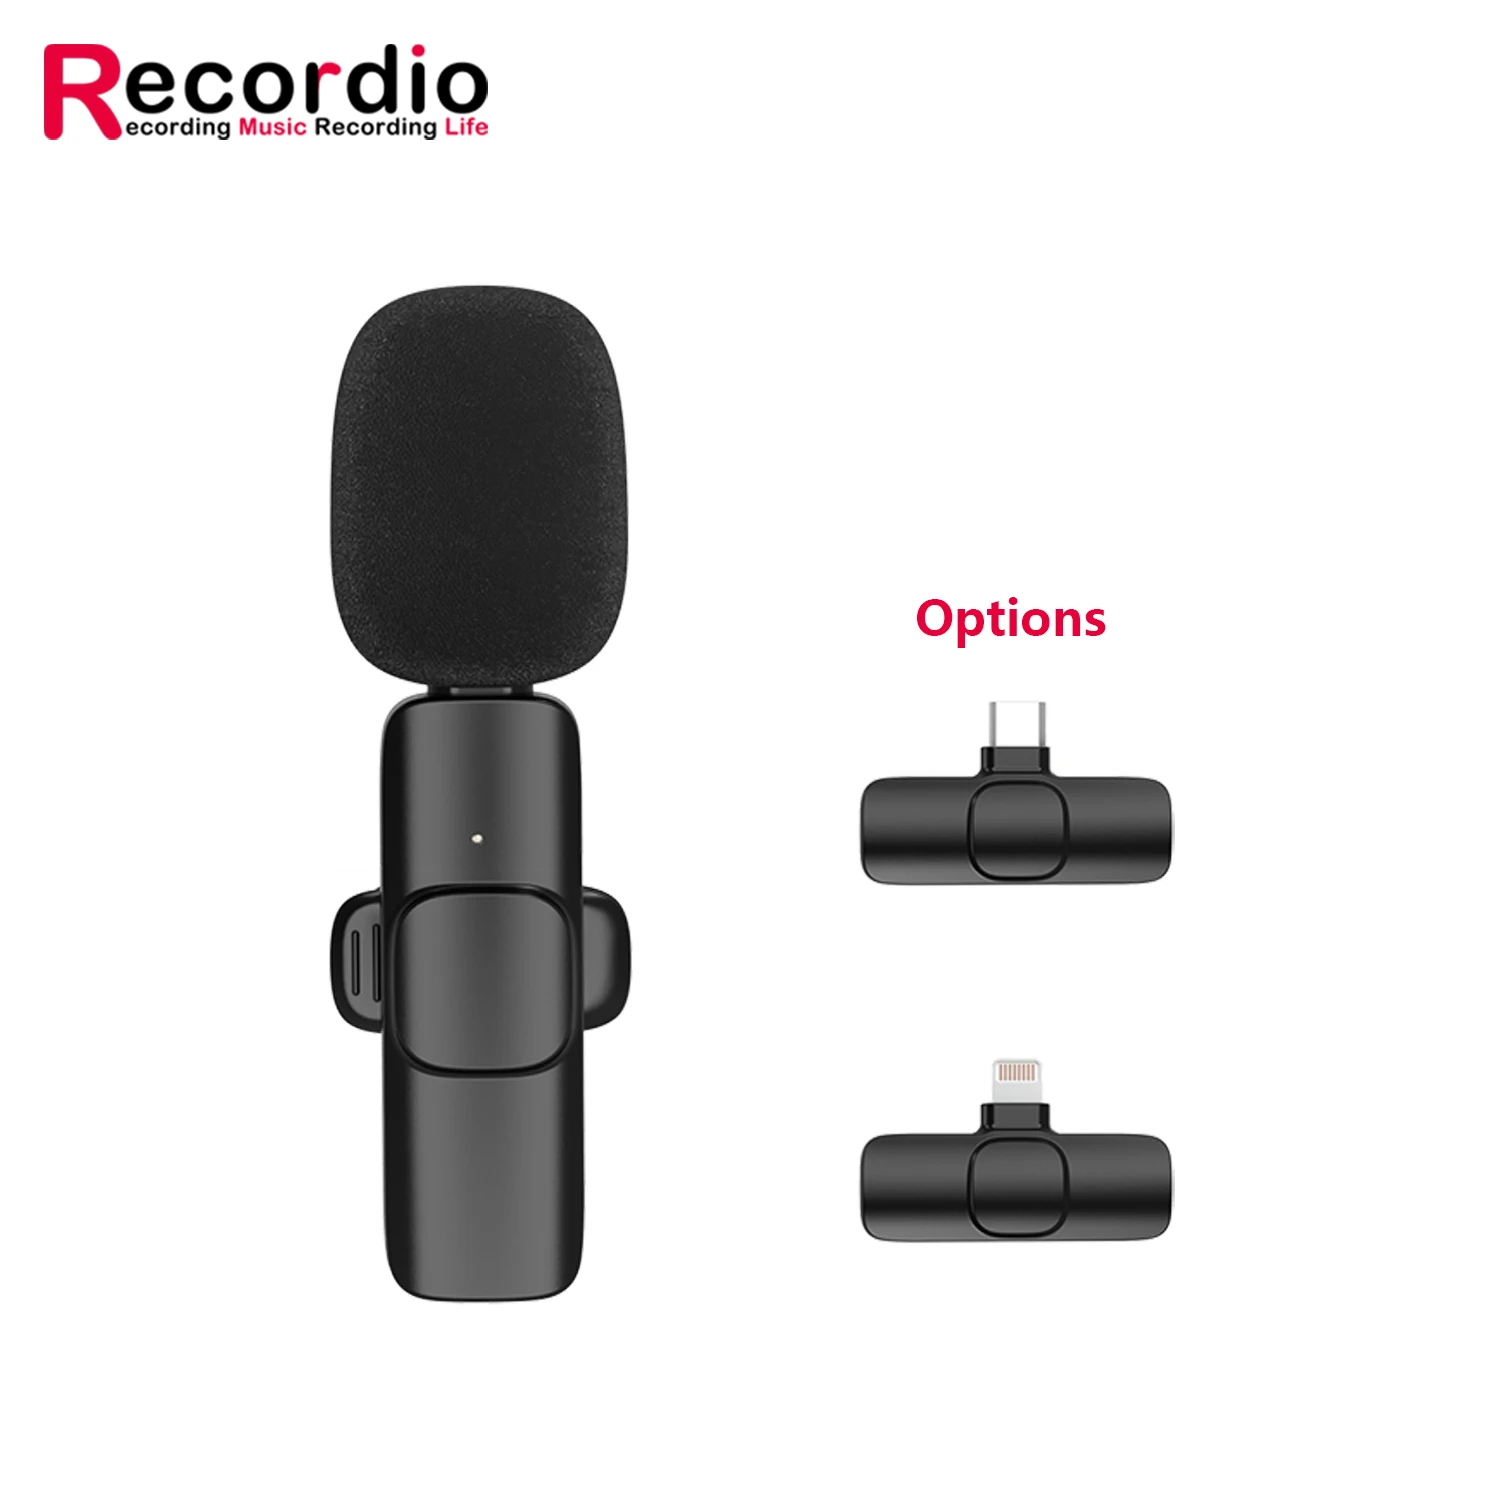 

GAW-910 2.4G new technology High-quality radio Wireless lavalier for Widely compatible Live broadcast, Black